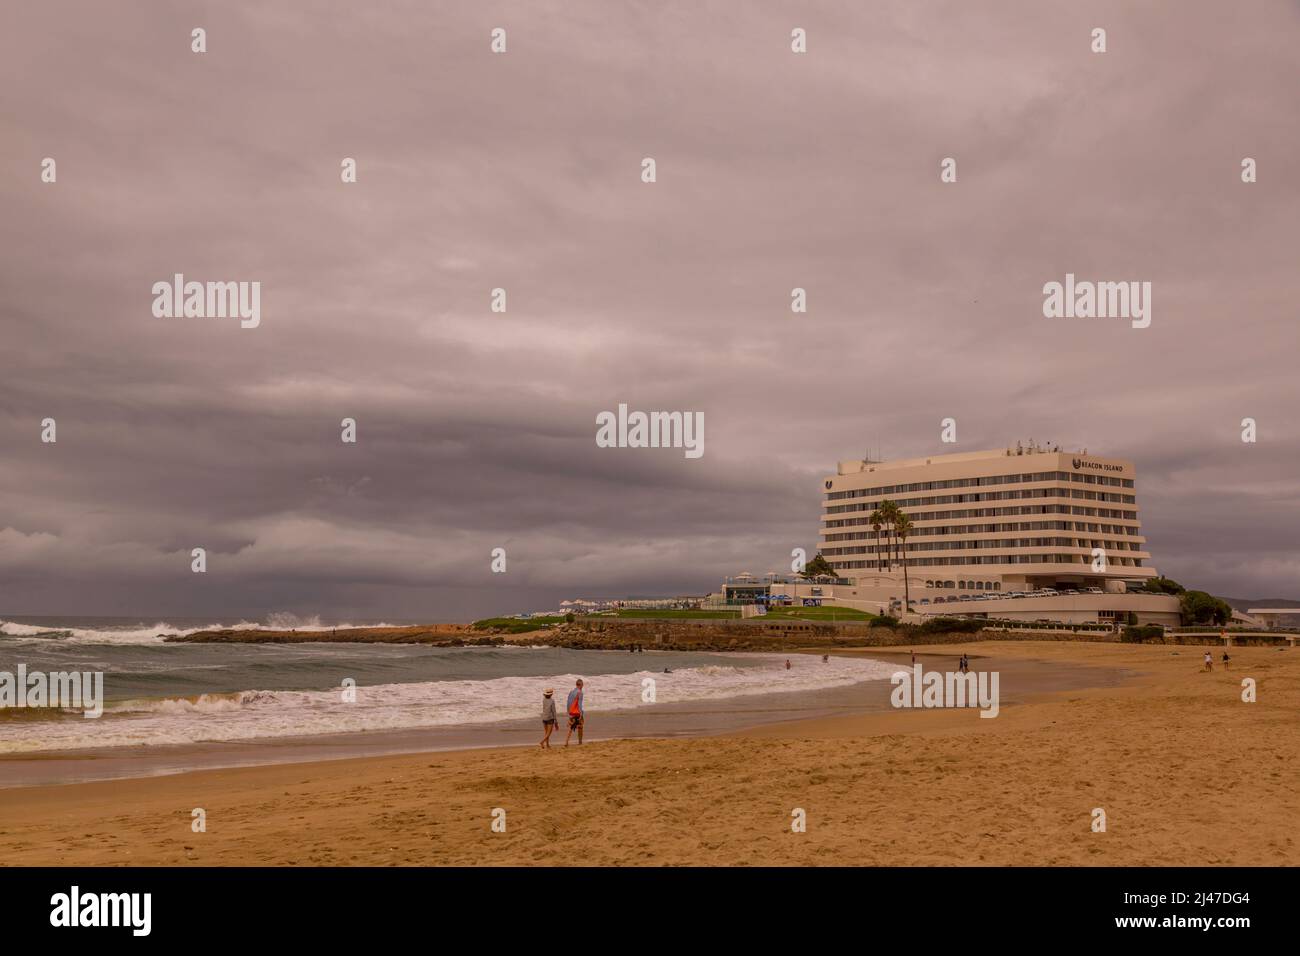 Plettenberg Bay in South Africa, with the Plettenberg Bay hotel. Stock Photo